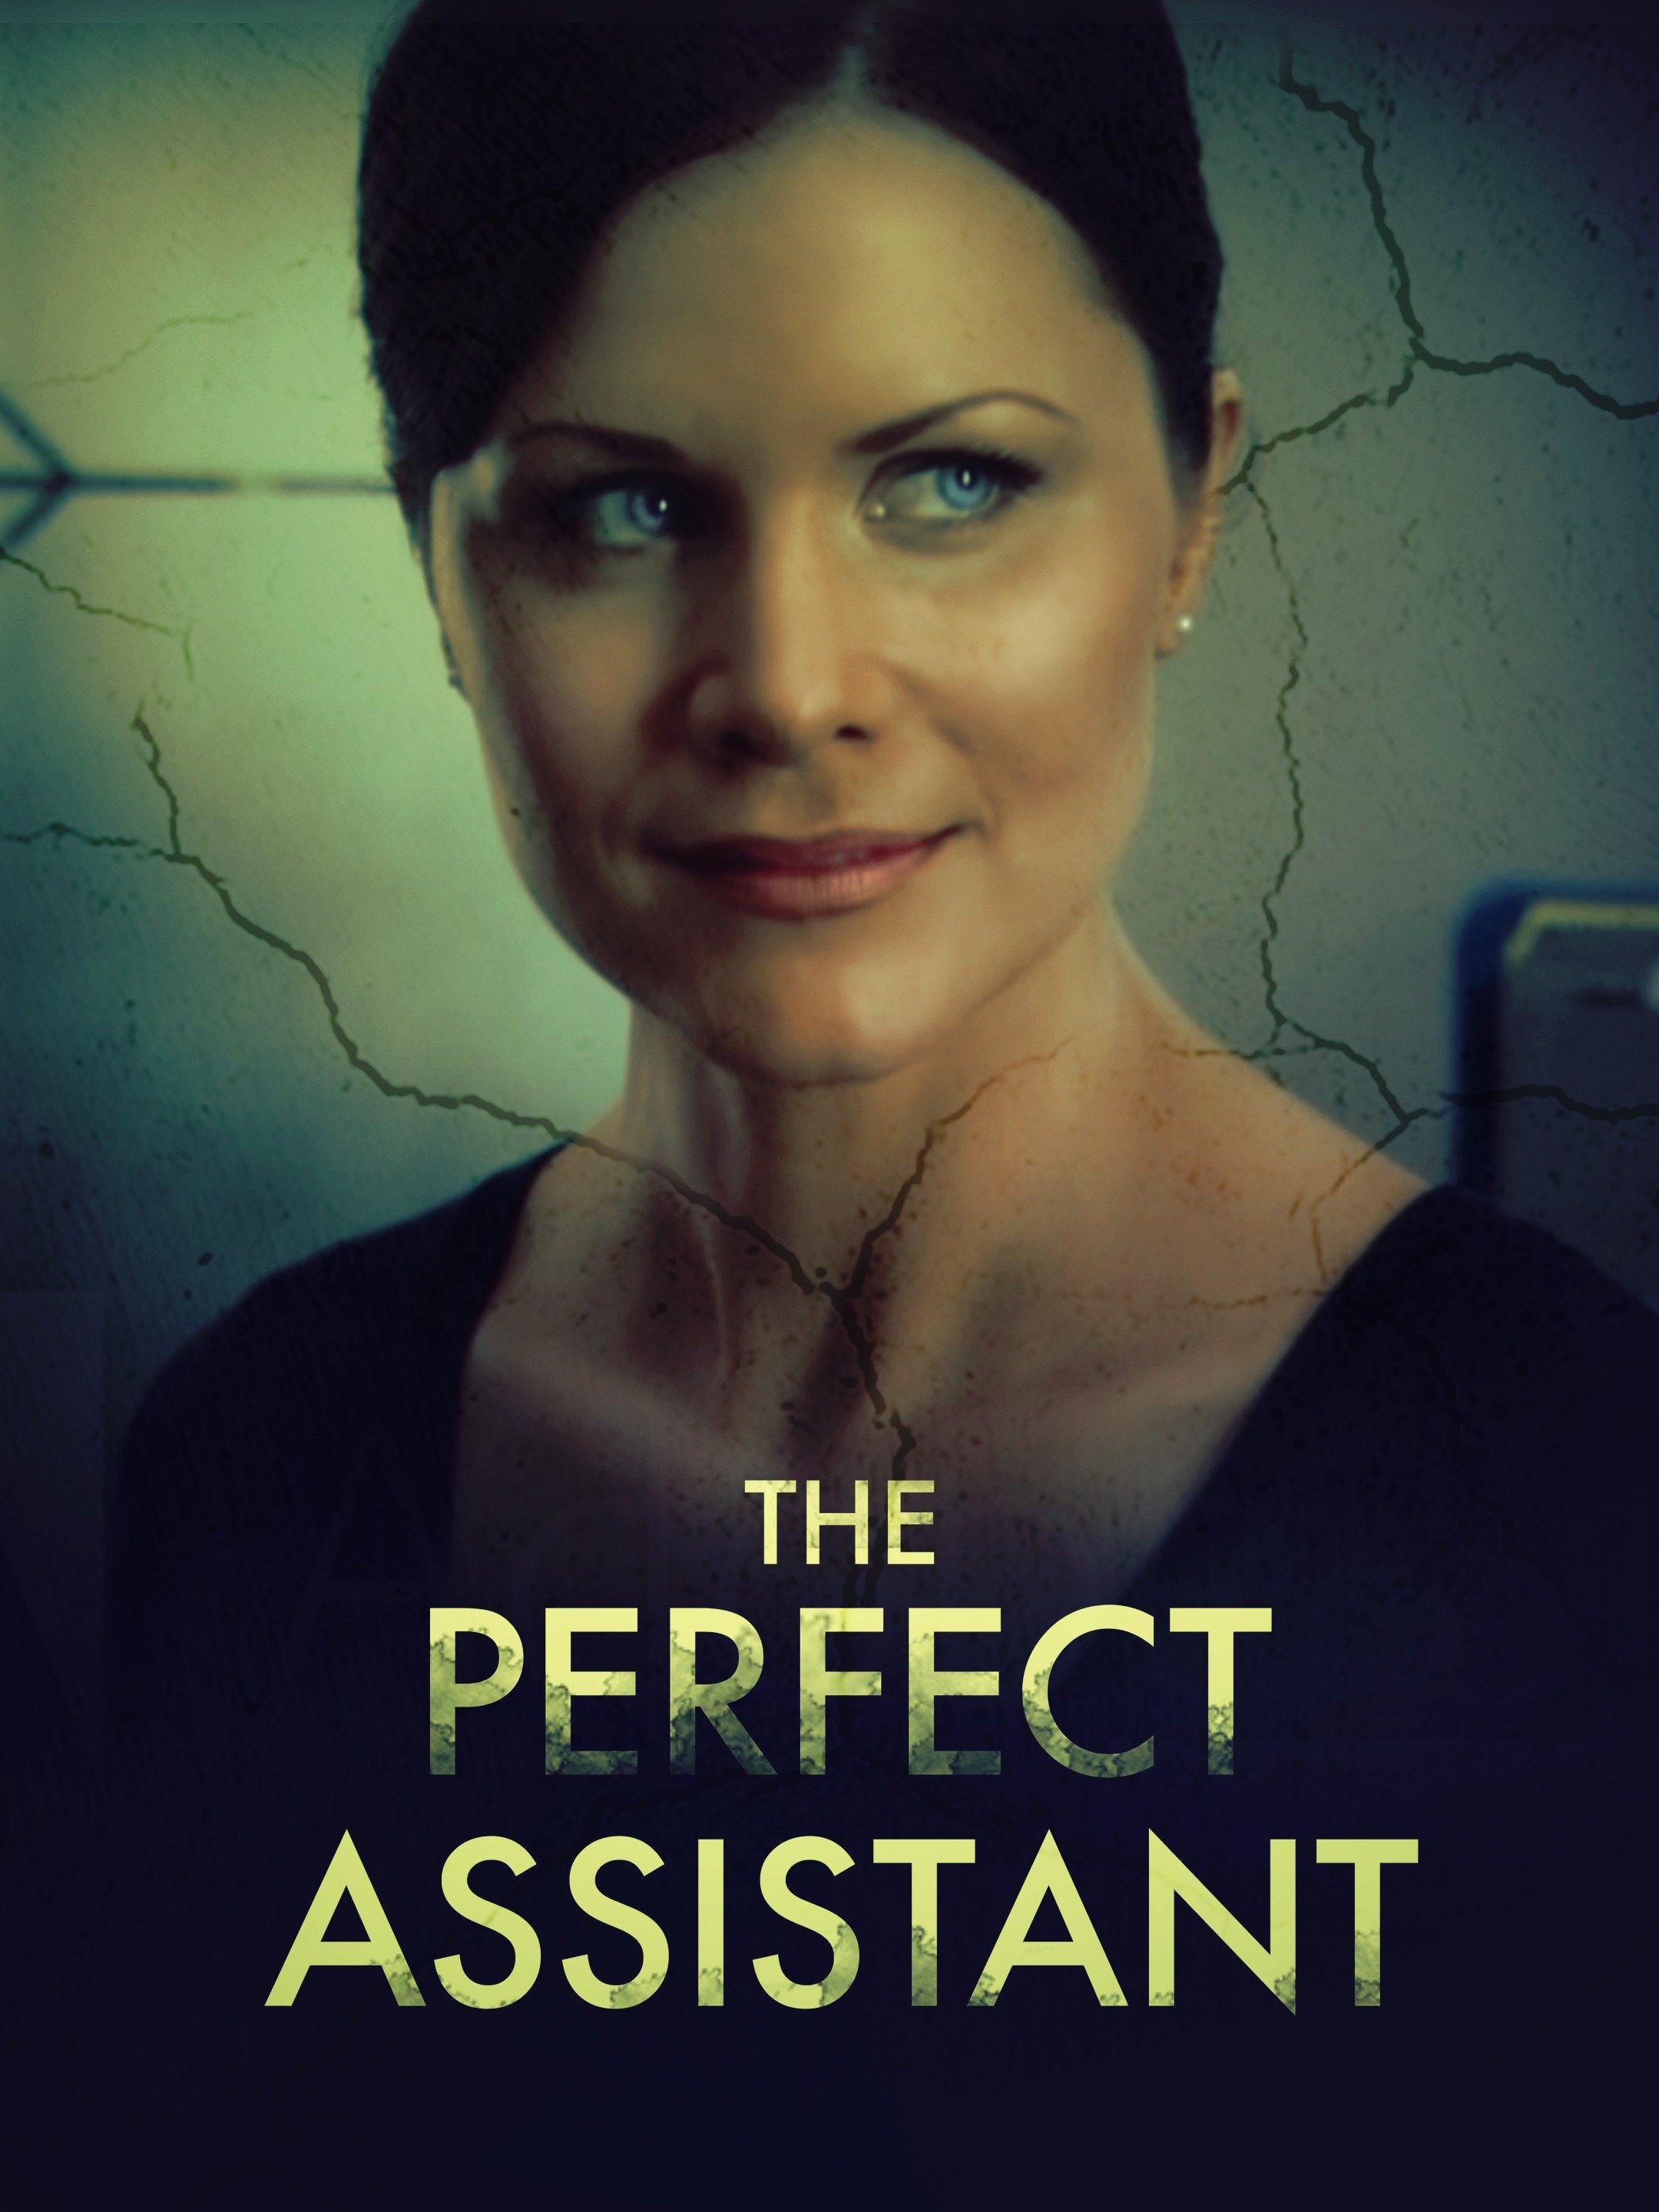 the perfect assistant movie youtube